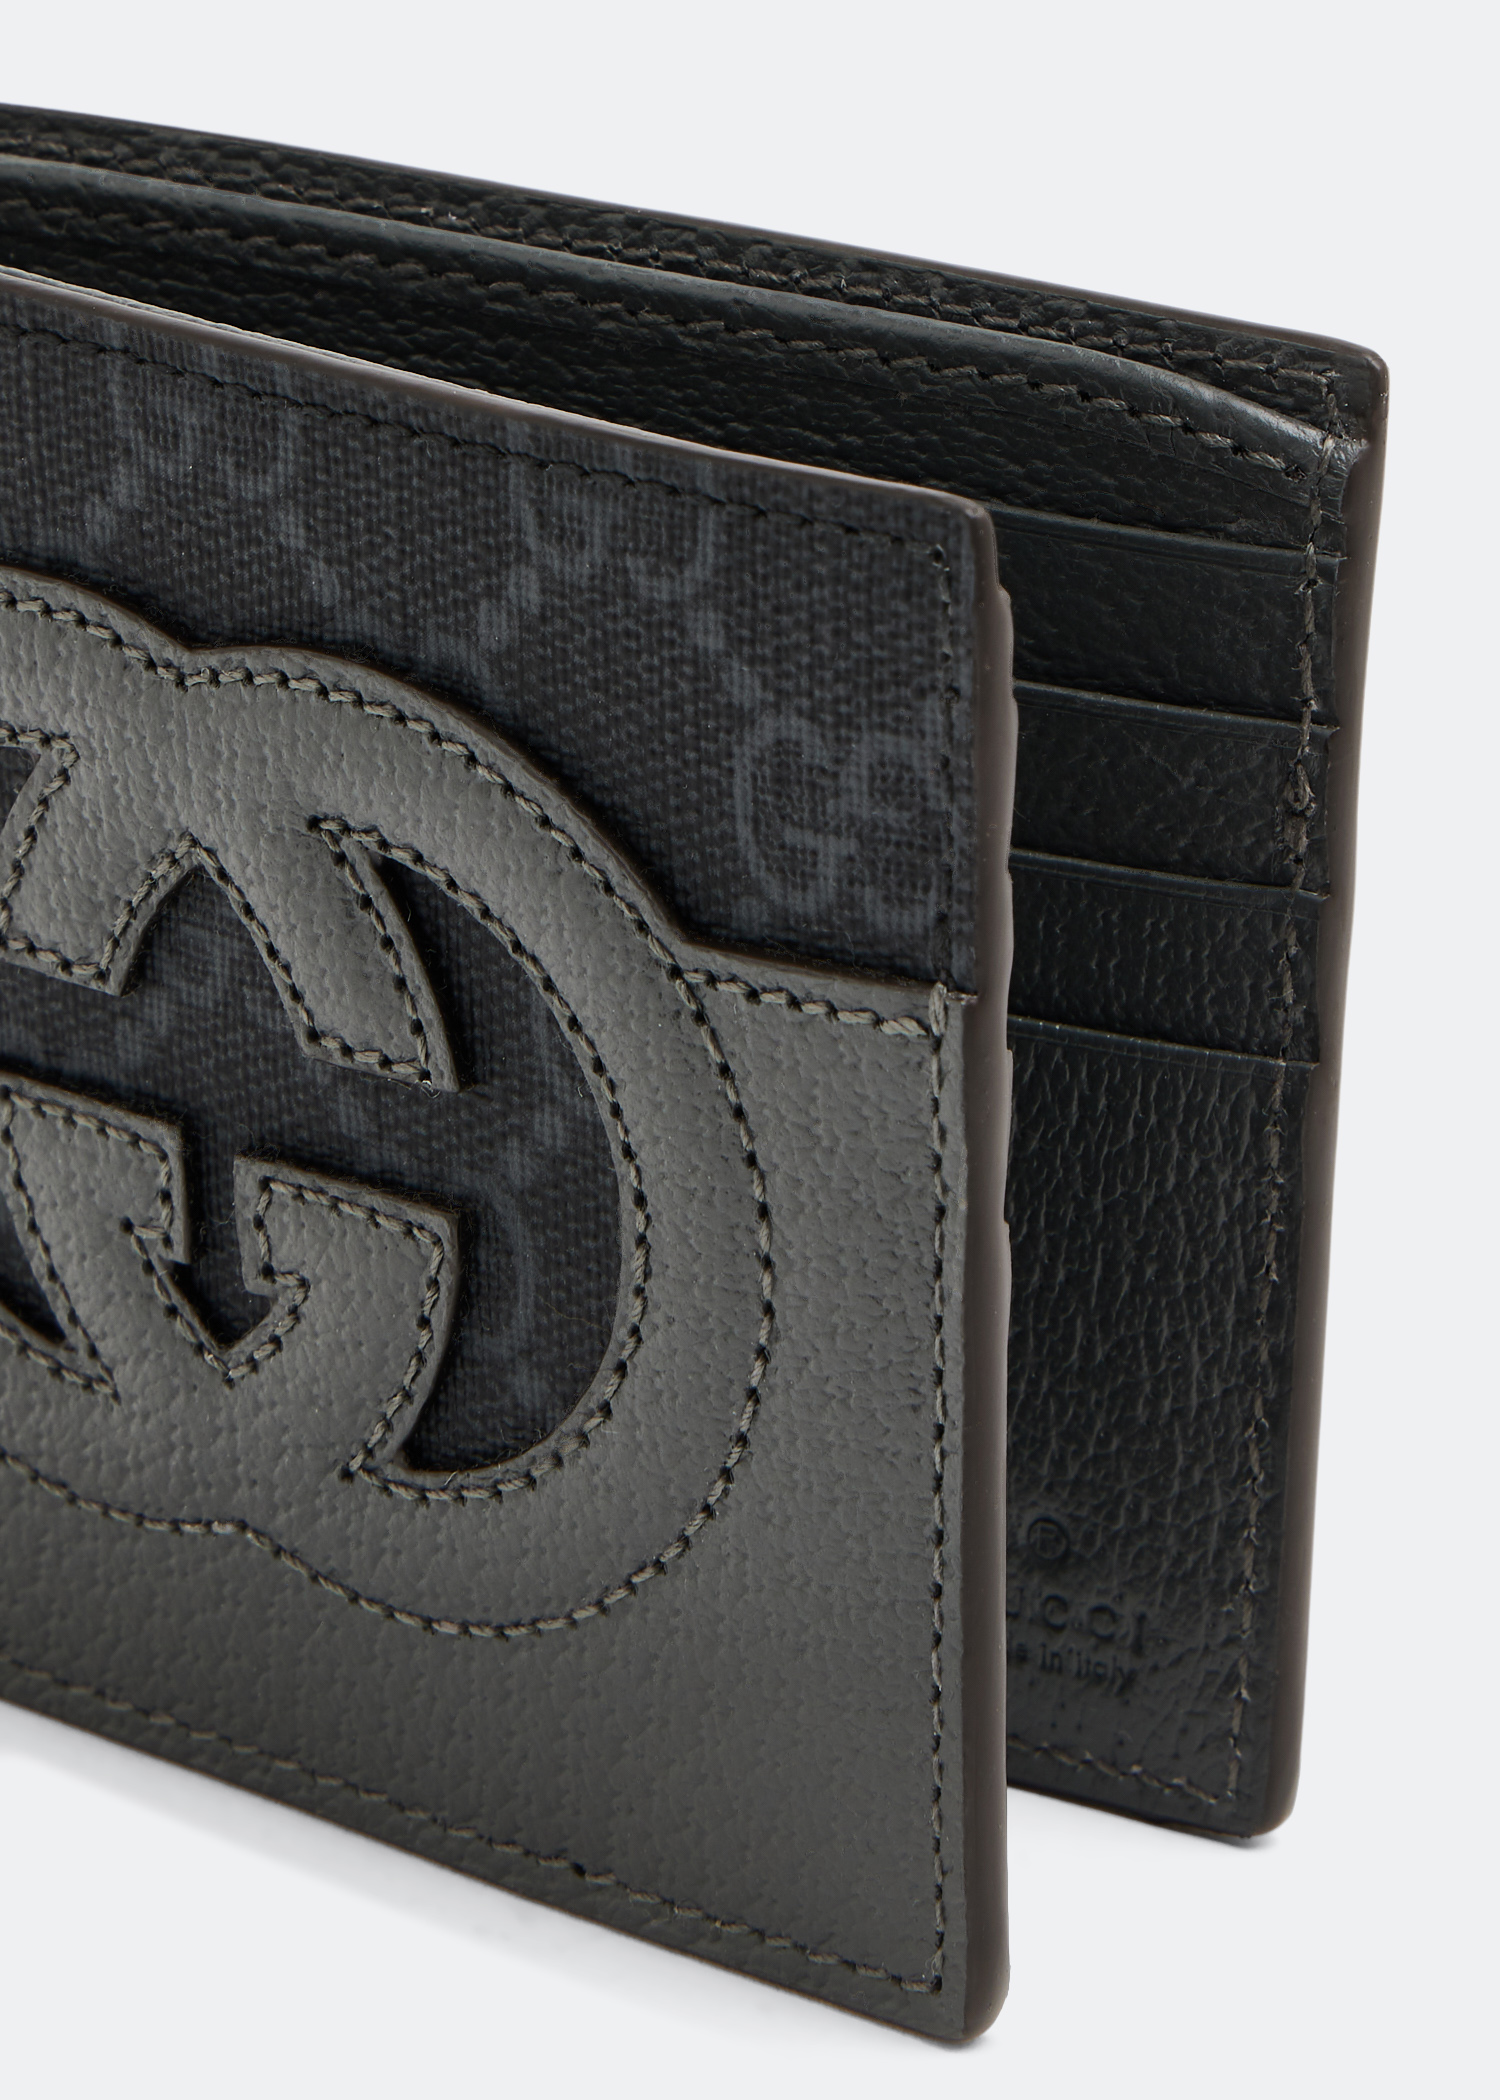 Wallet with cut-out Interlocking G in black and grey Supreme